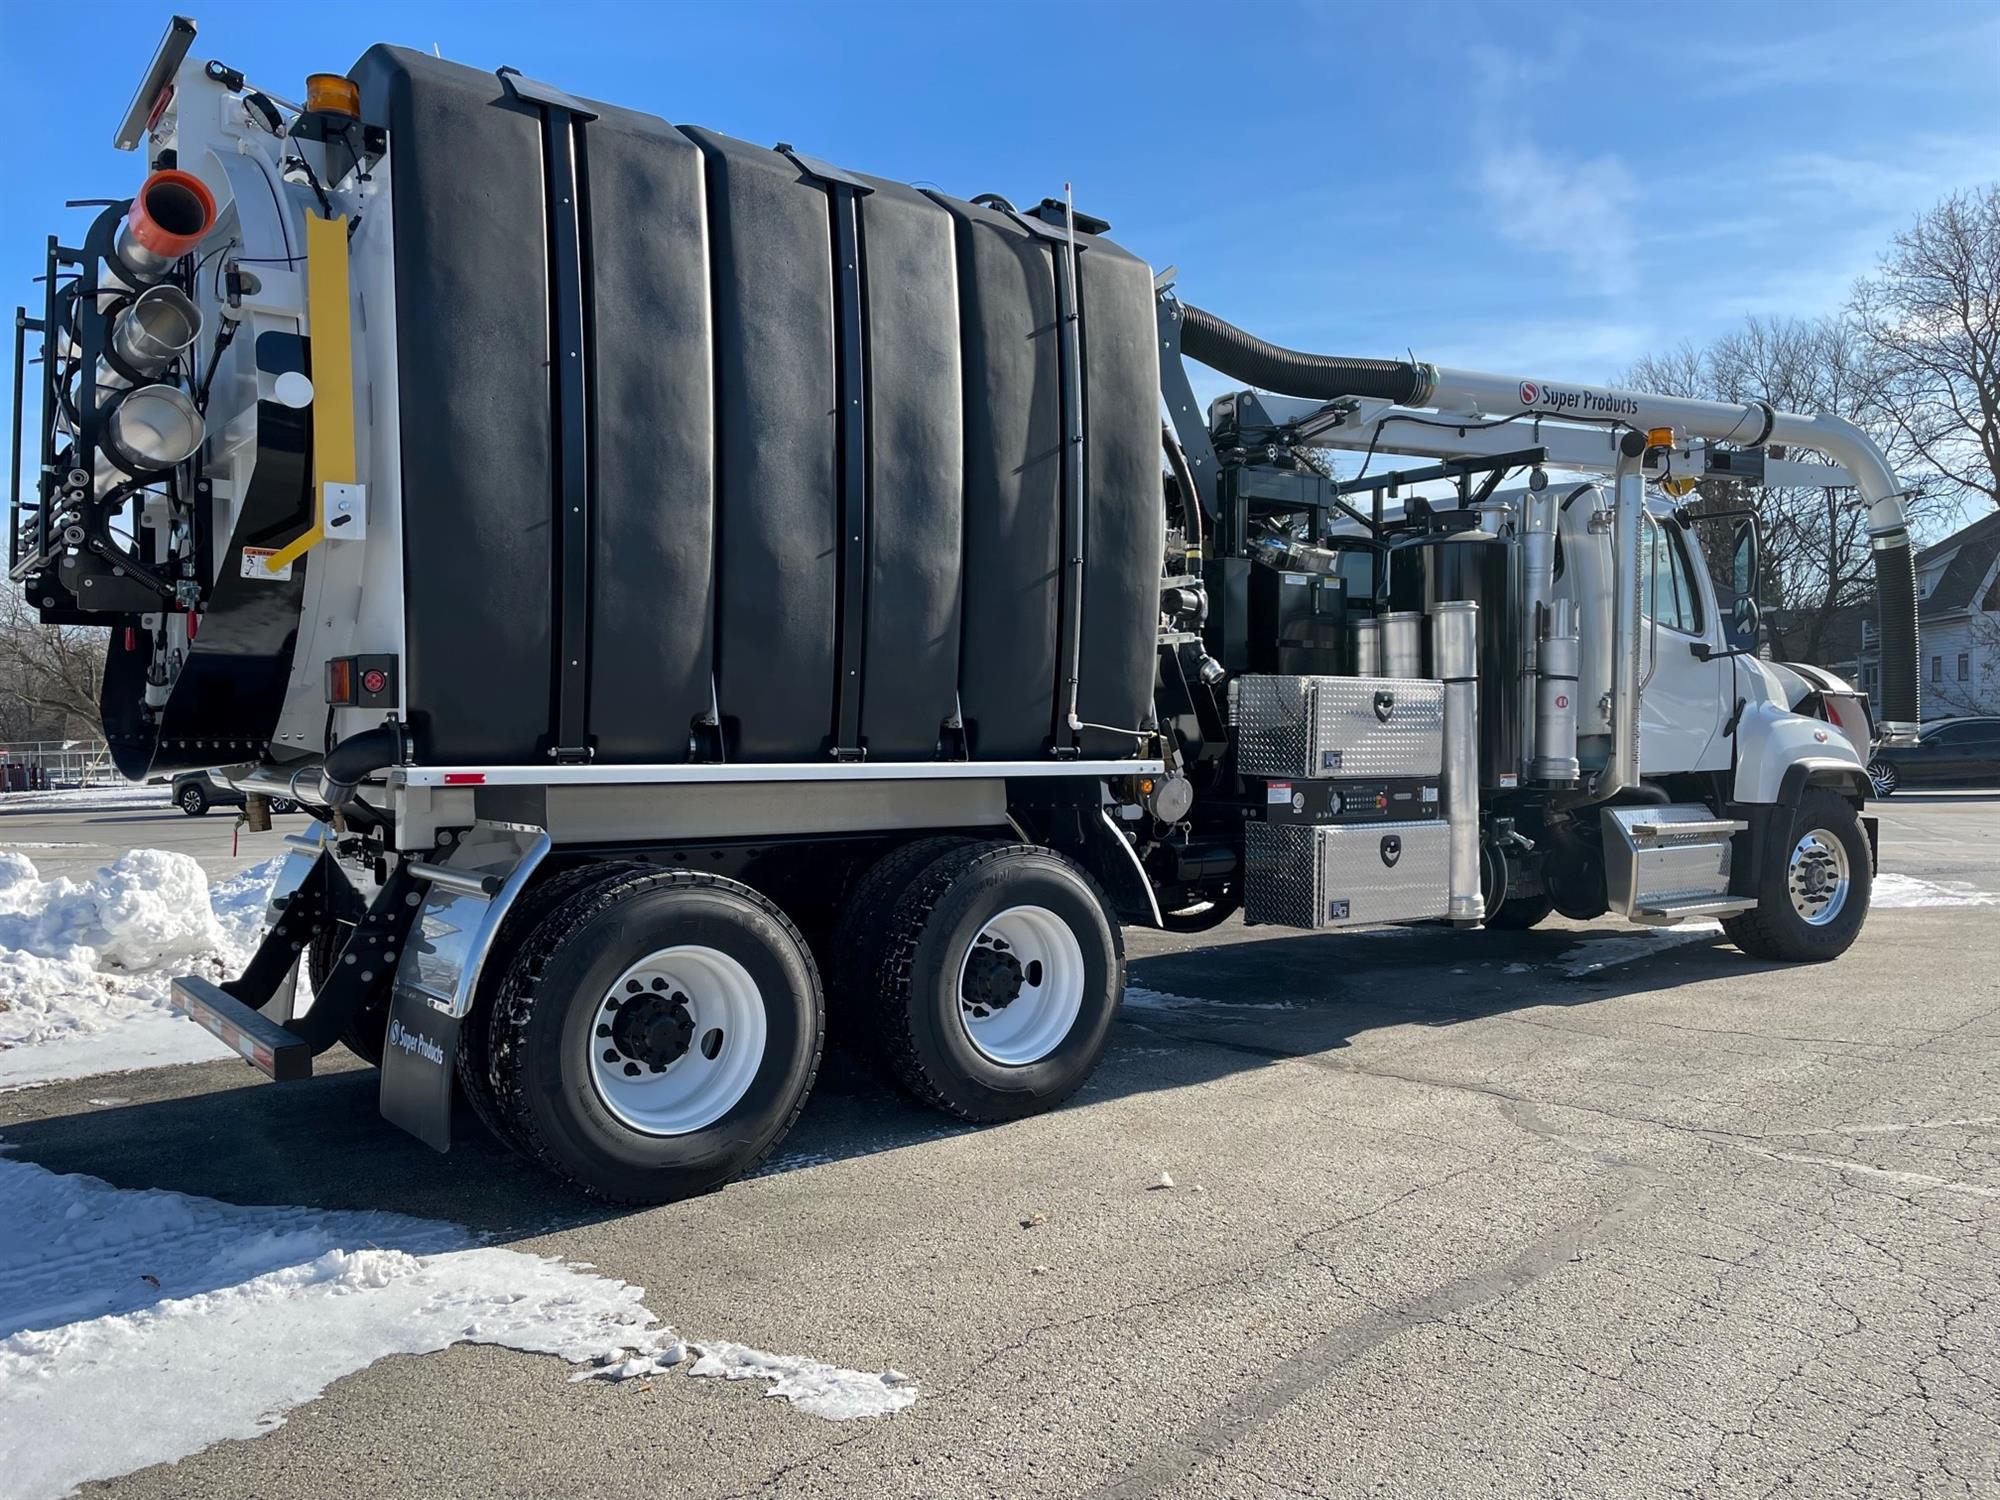 Sewer Management Vehicles in Wisconsin